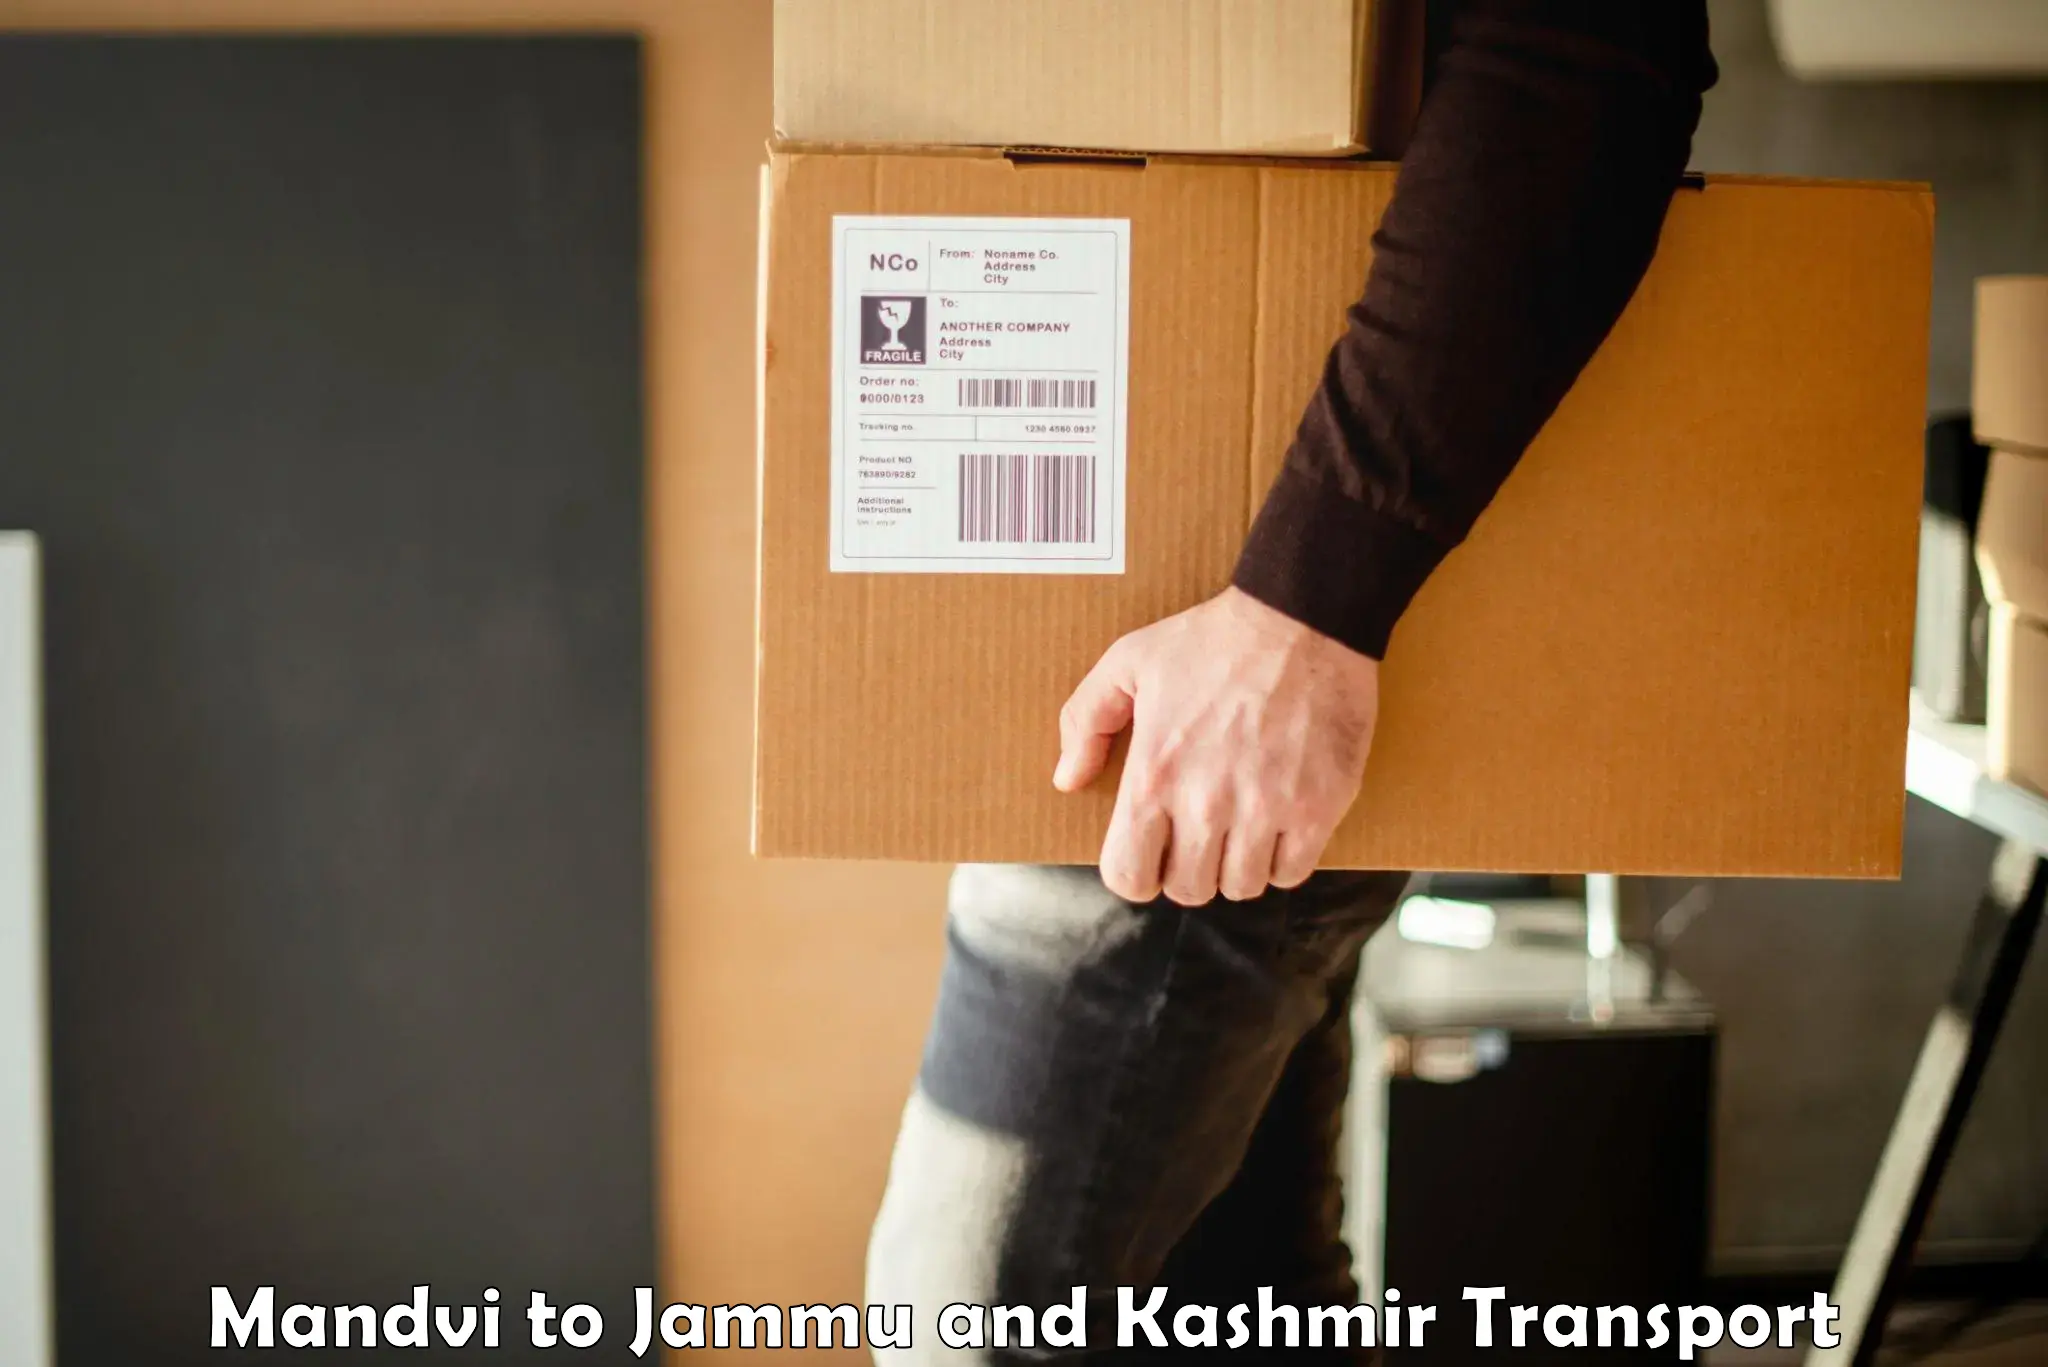 Truck transport companies in India Mandvi to Pulwama